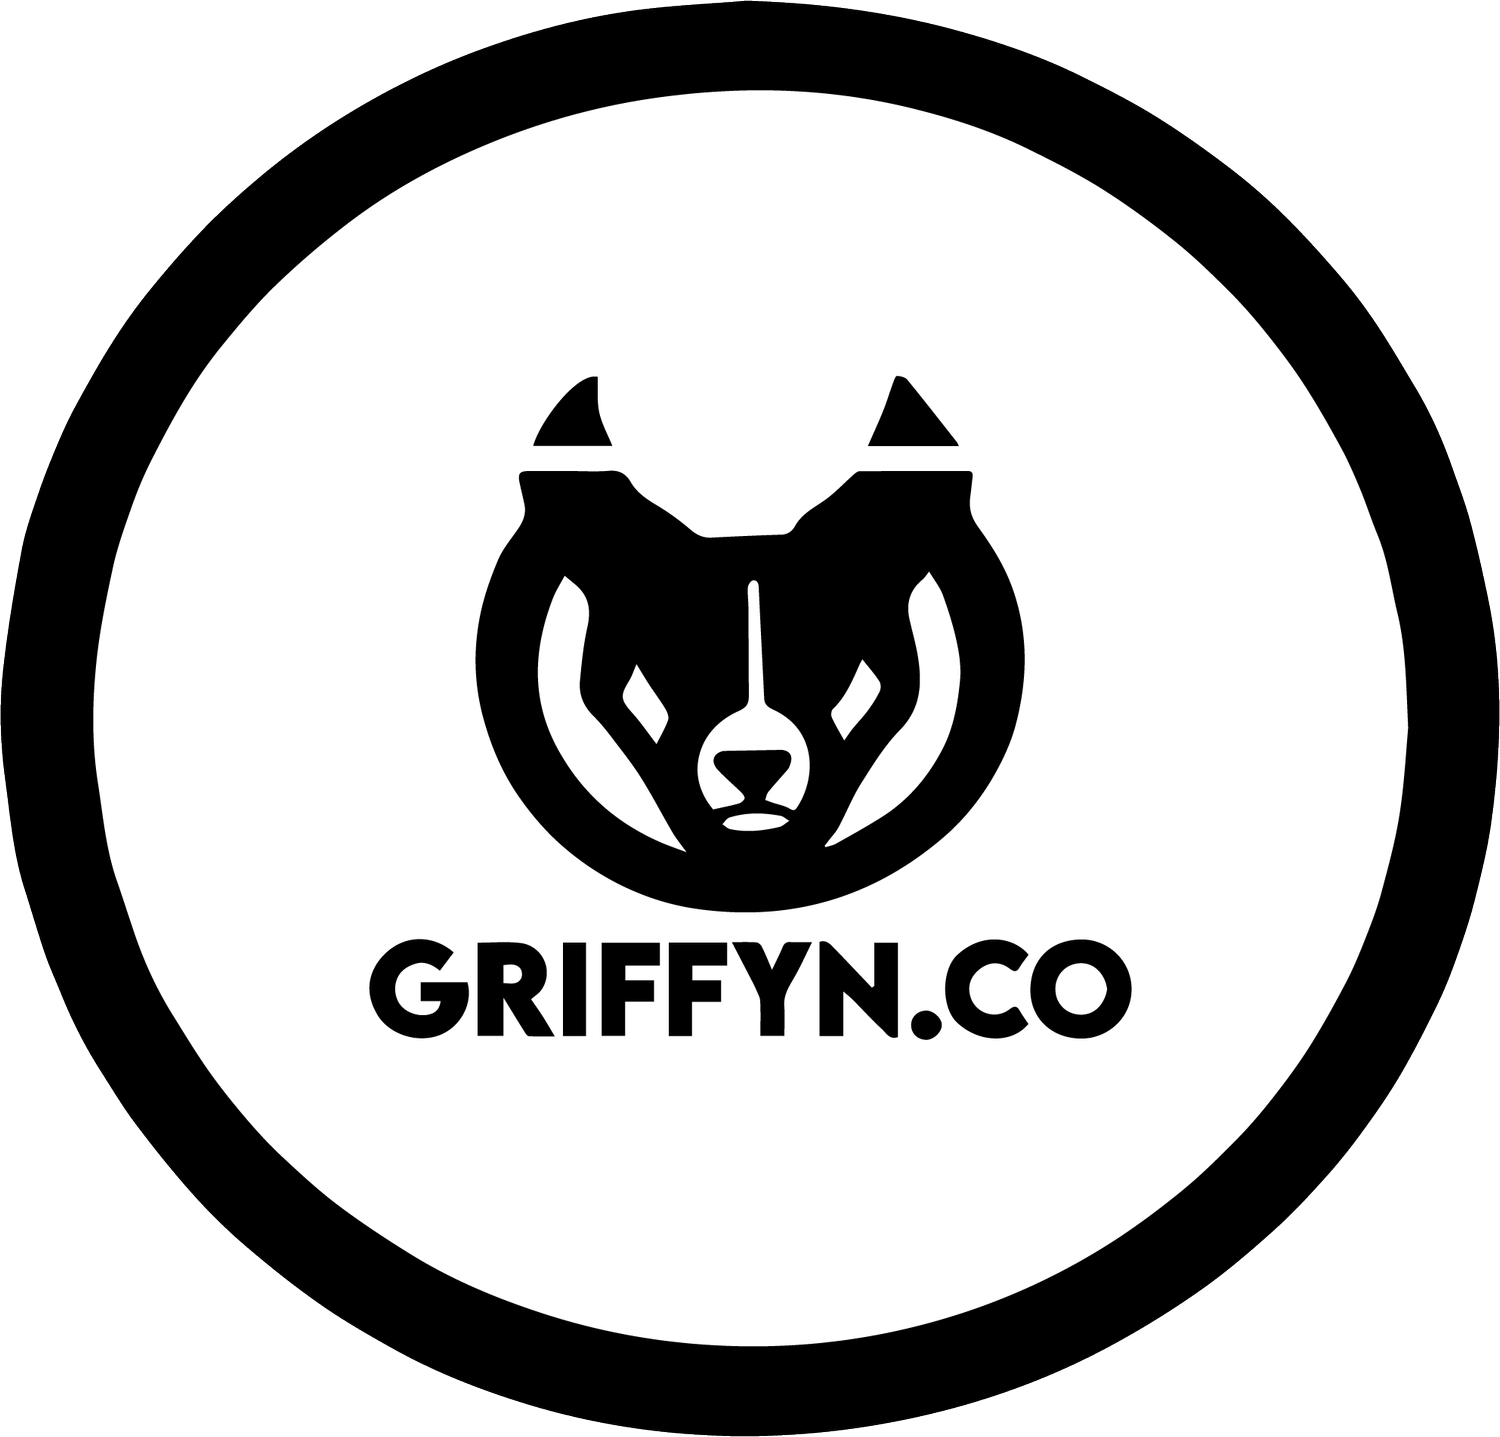 Griffyn.Co Productions